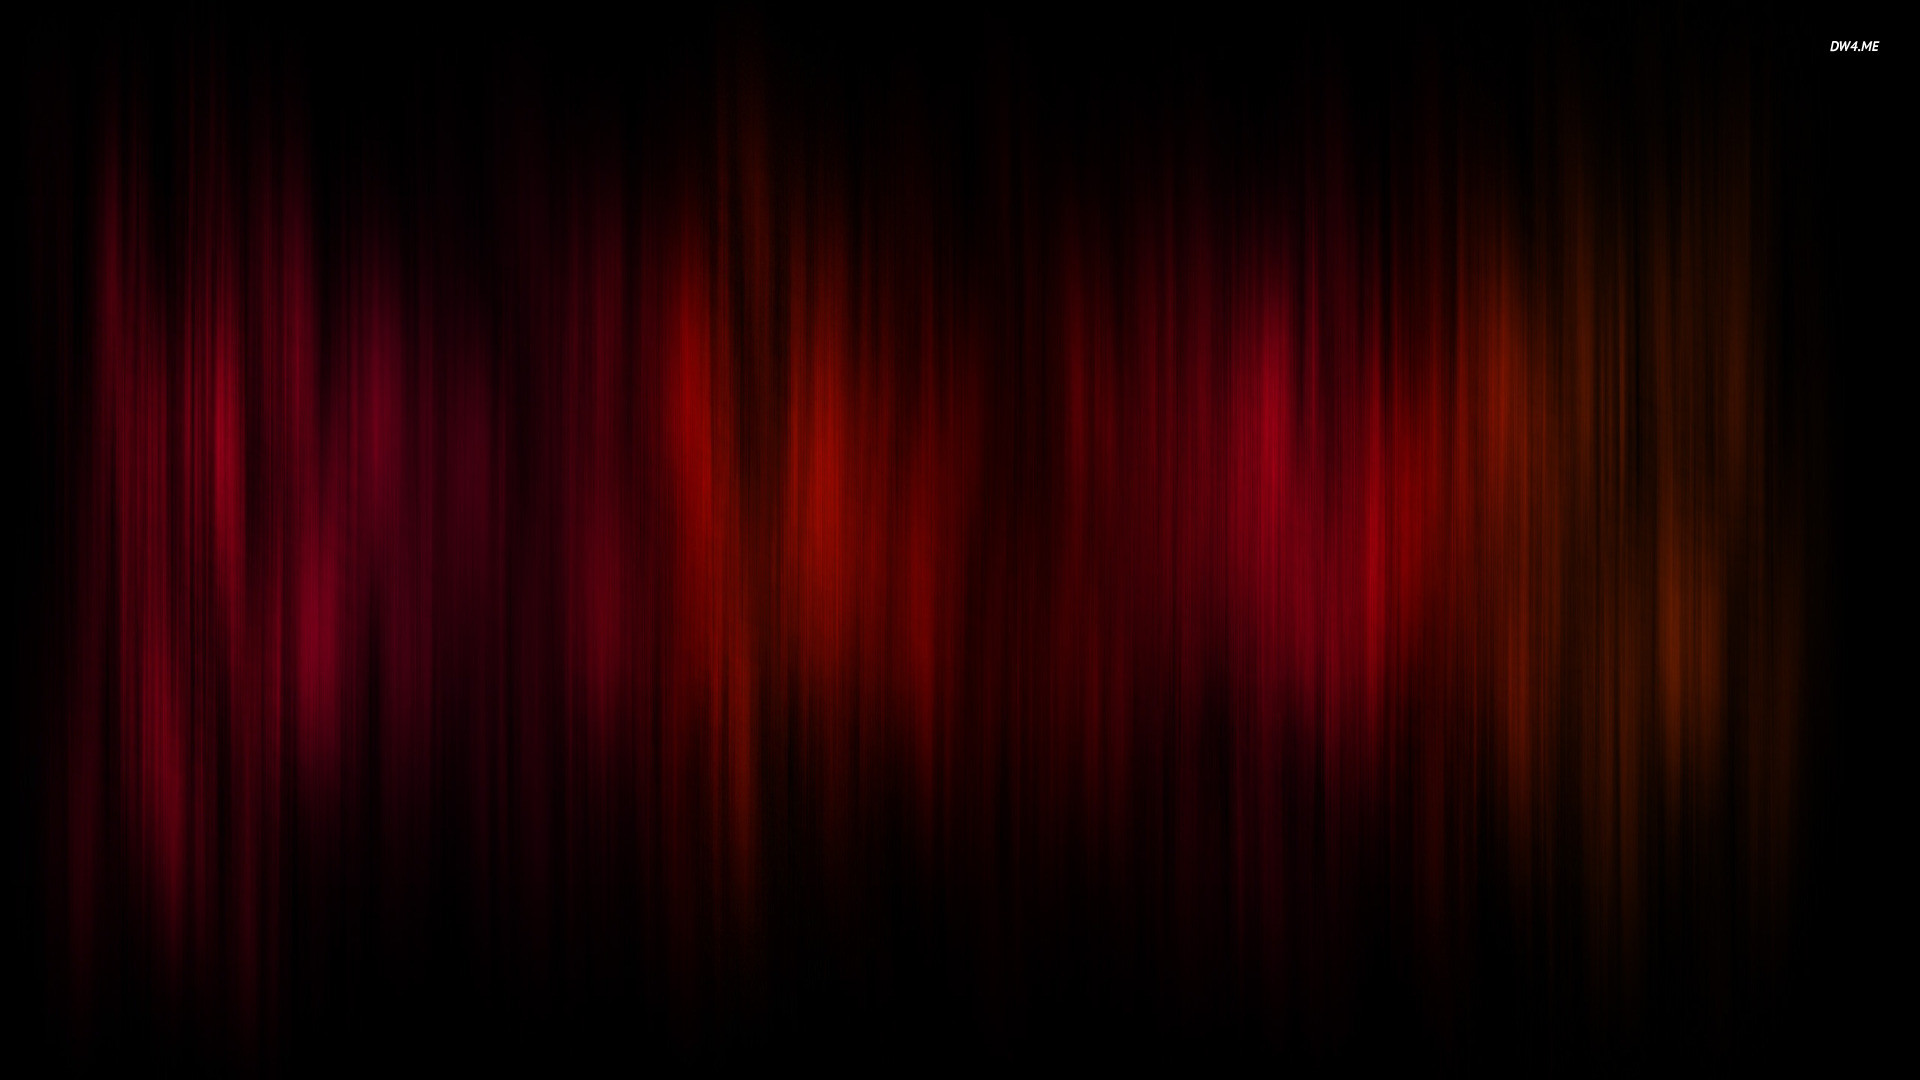 1920x1080 HD Black And Red Image.